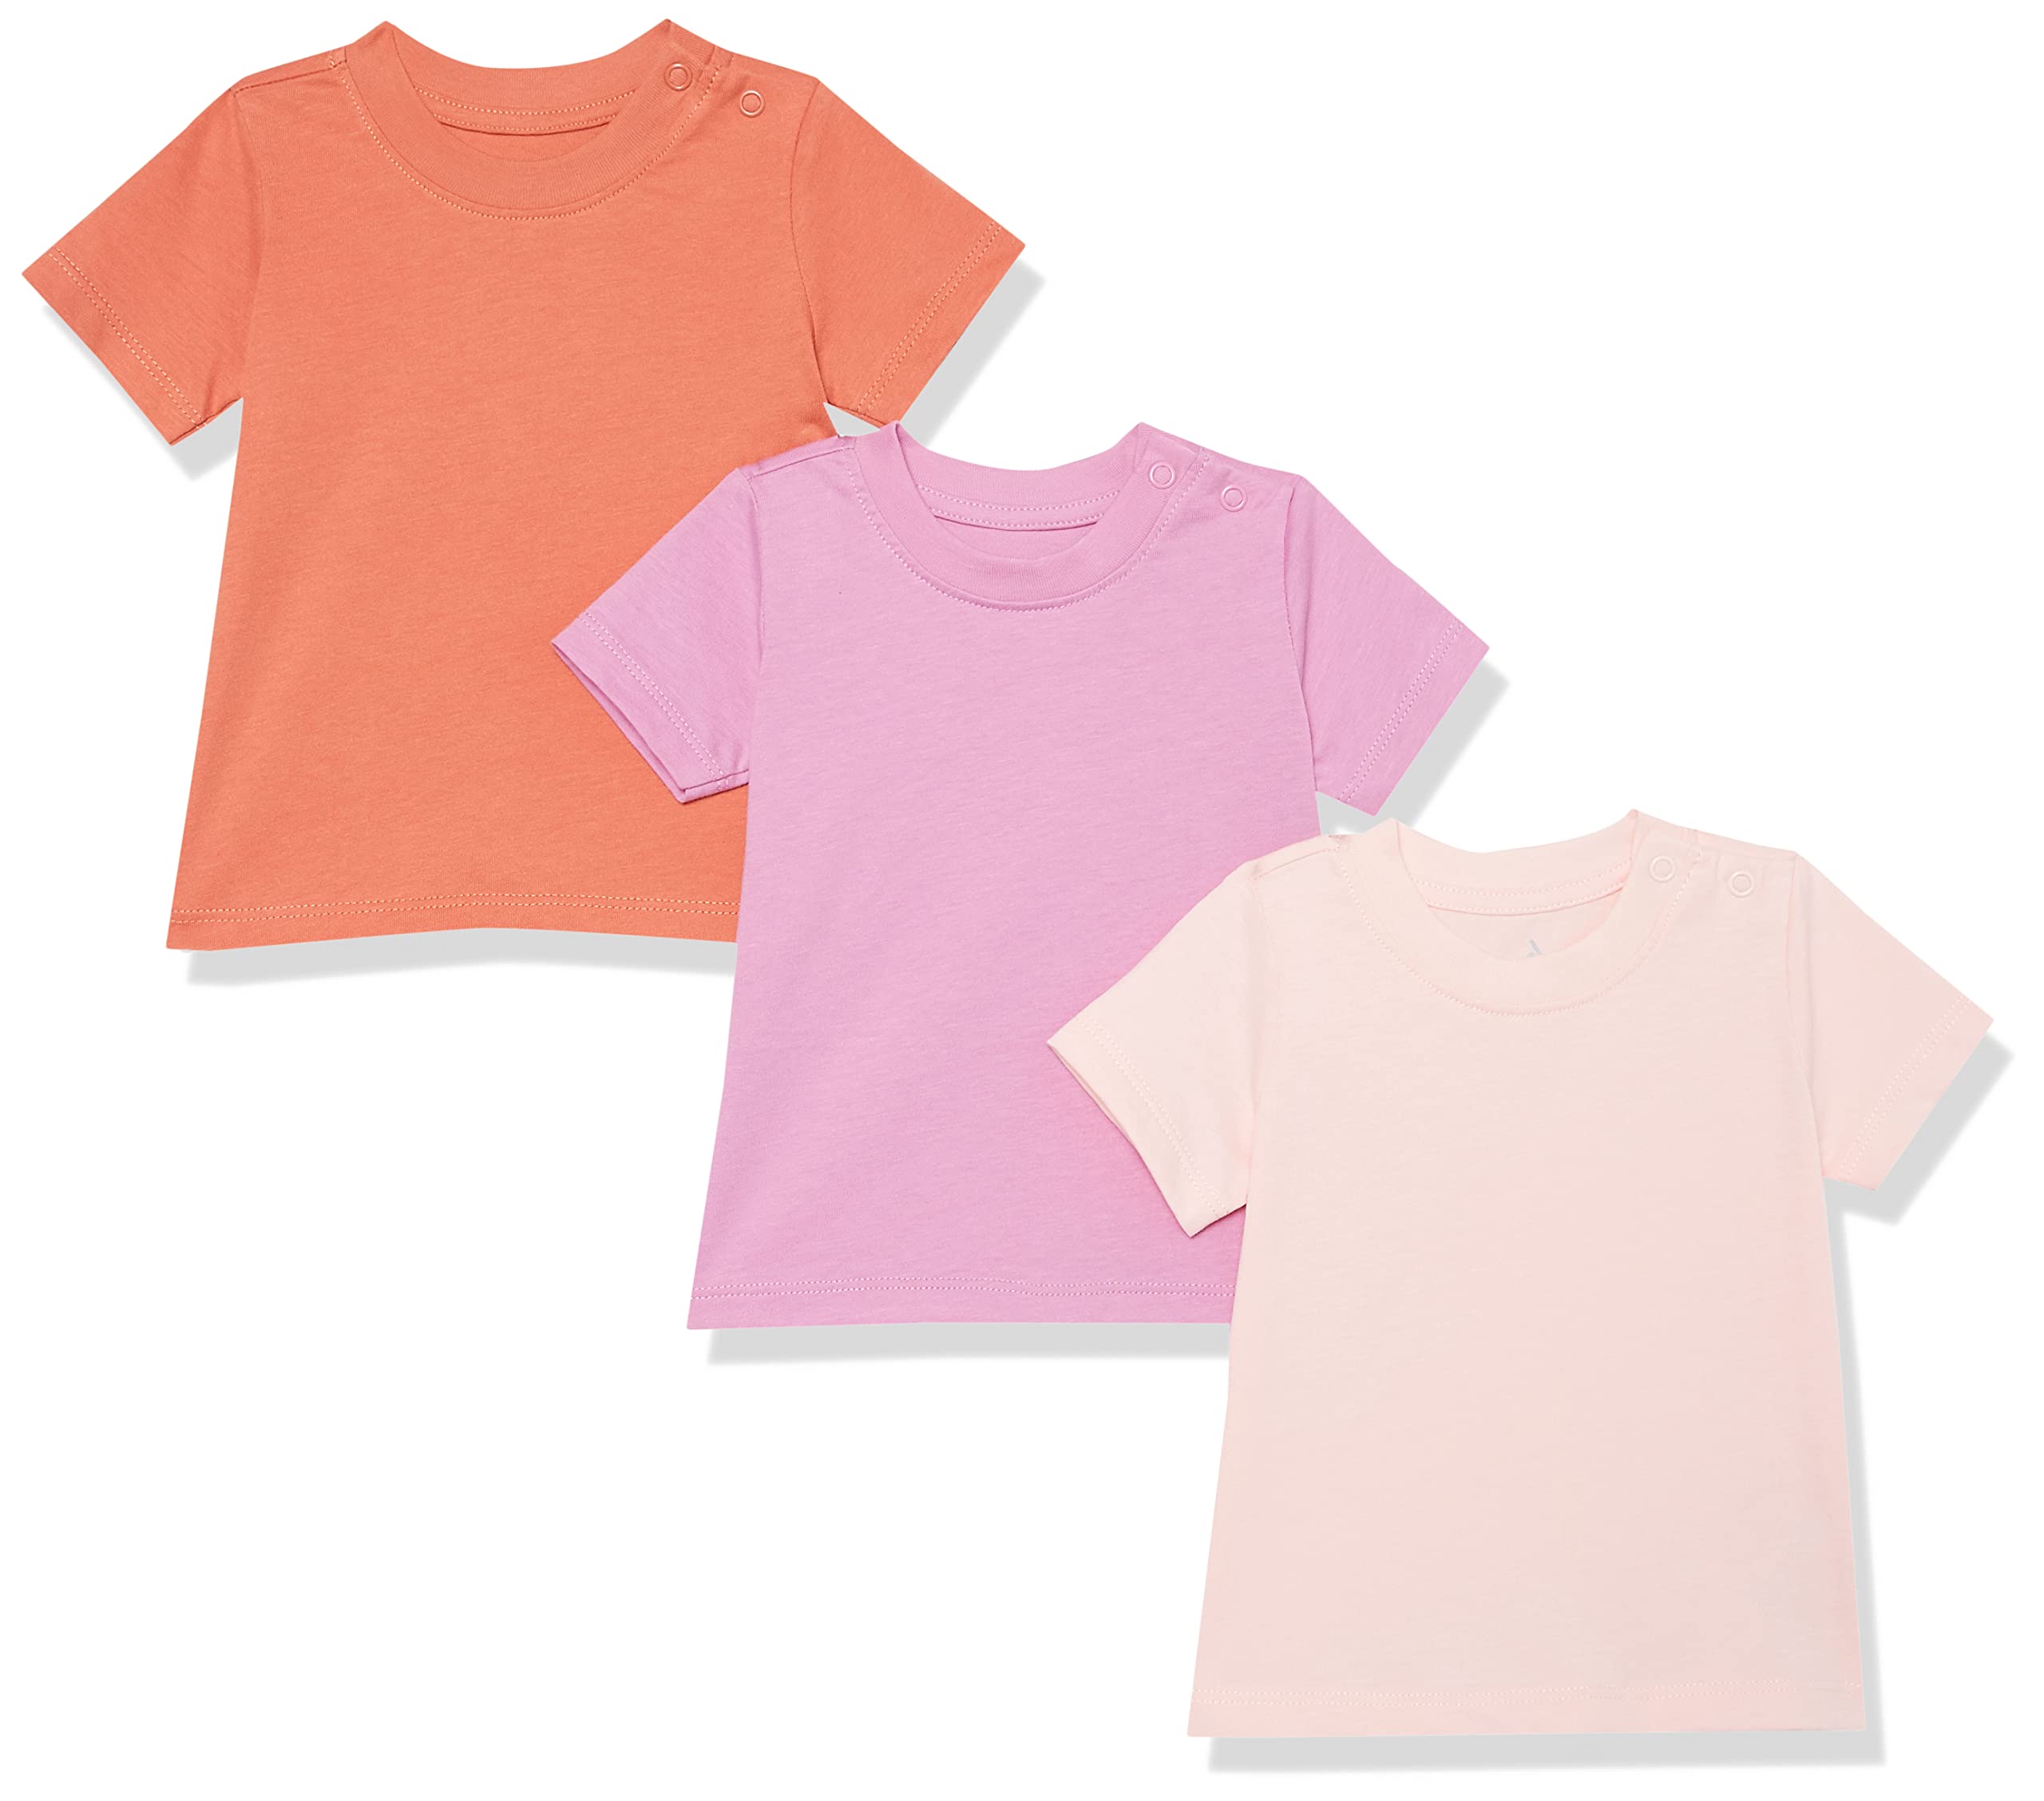 Amazon Essentials Unisex Babies' Organic Cotton Short Sleeve T-Shirt (Previously Amazon Aware), Pack of 3